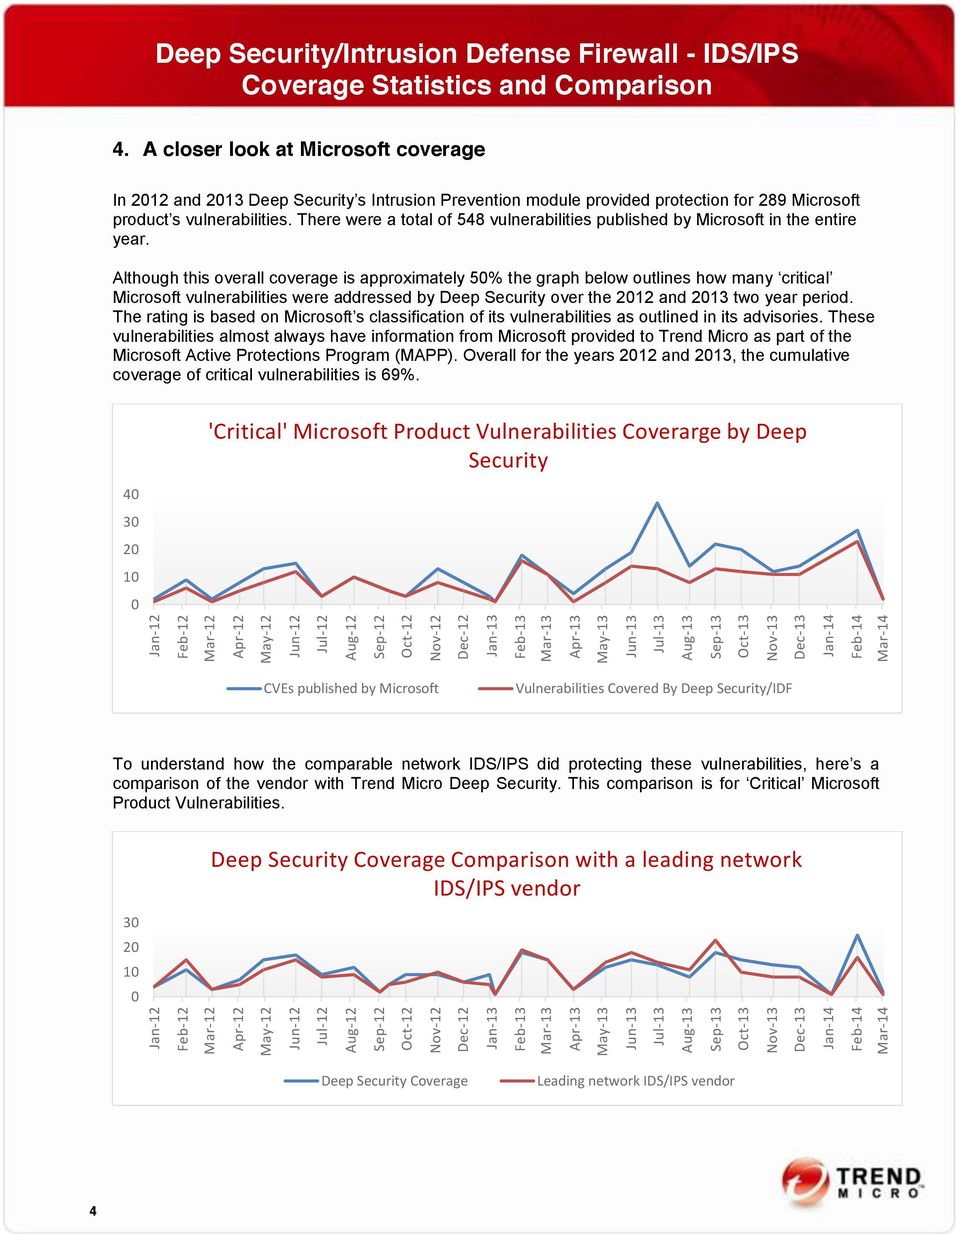 Although this overall coverage is approximately 50% the graph below outlines how many critical Microsoft vulnerabilities were addressed by Deep Security over the 2012 and 2013 two year period.